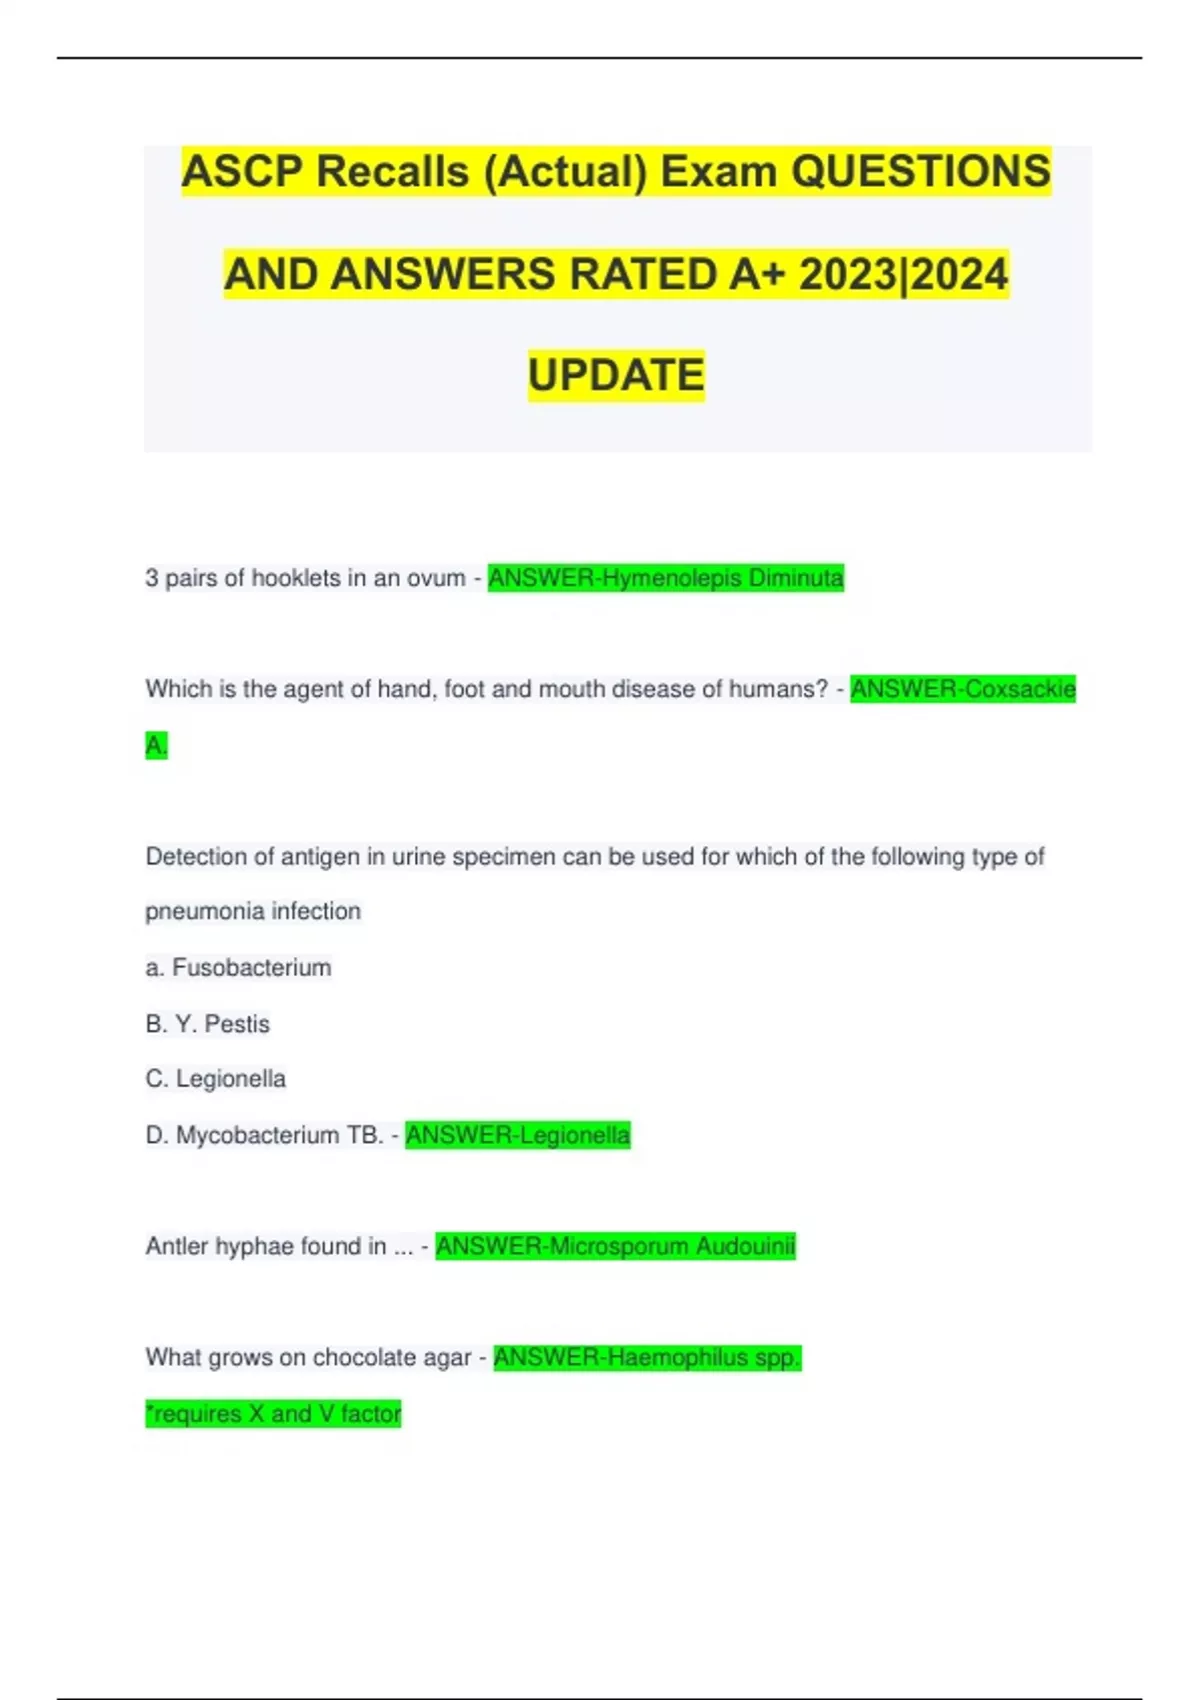 ASCP Recalls (Actual) Exam QUESTIONS AND ANSWERS RATED A+ 20232024